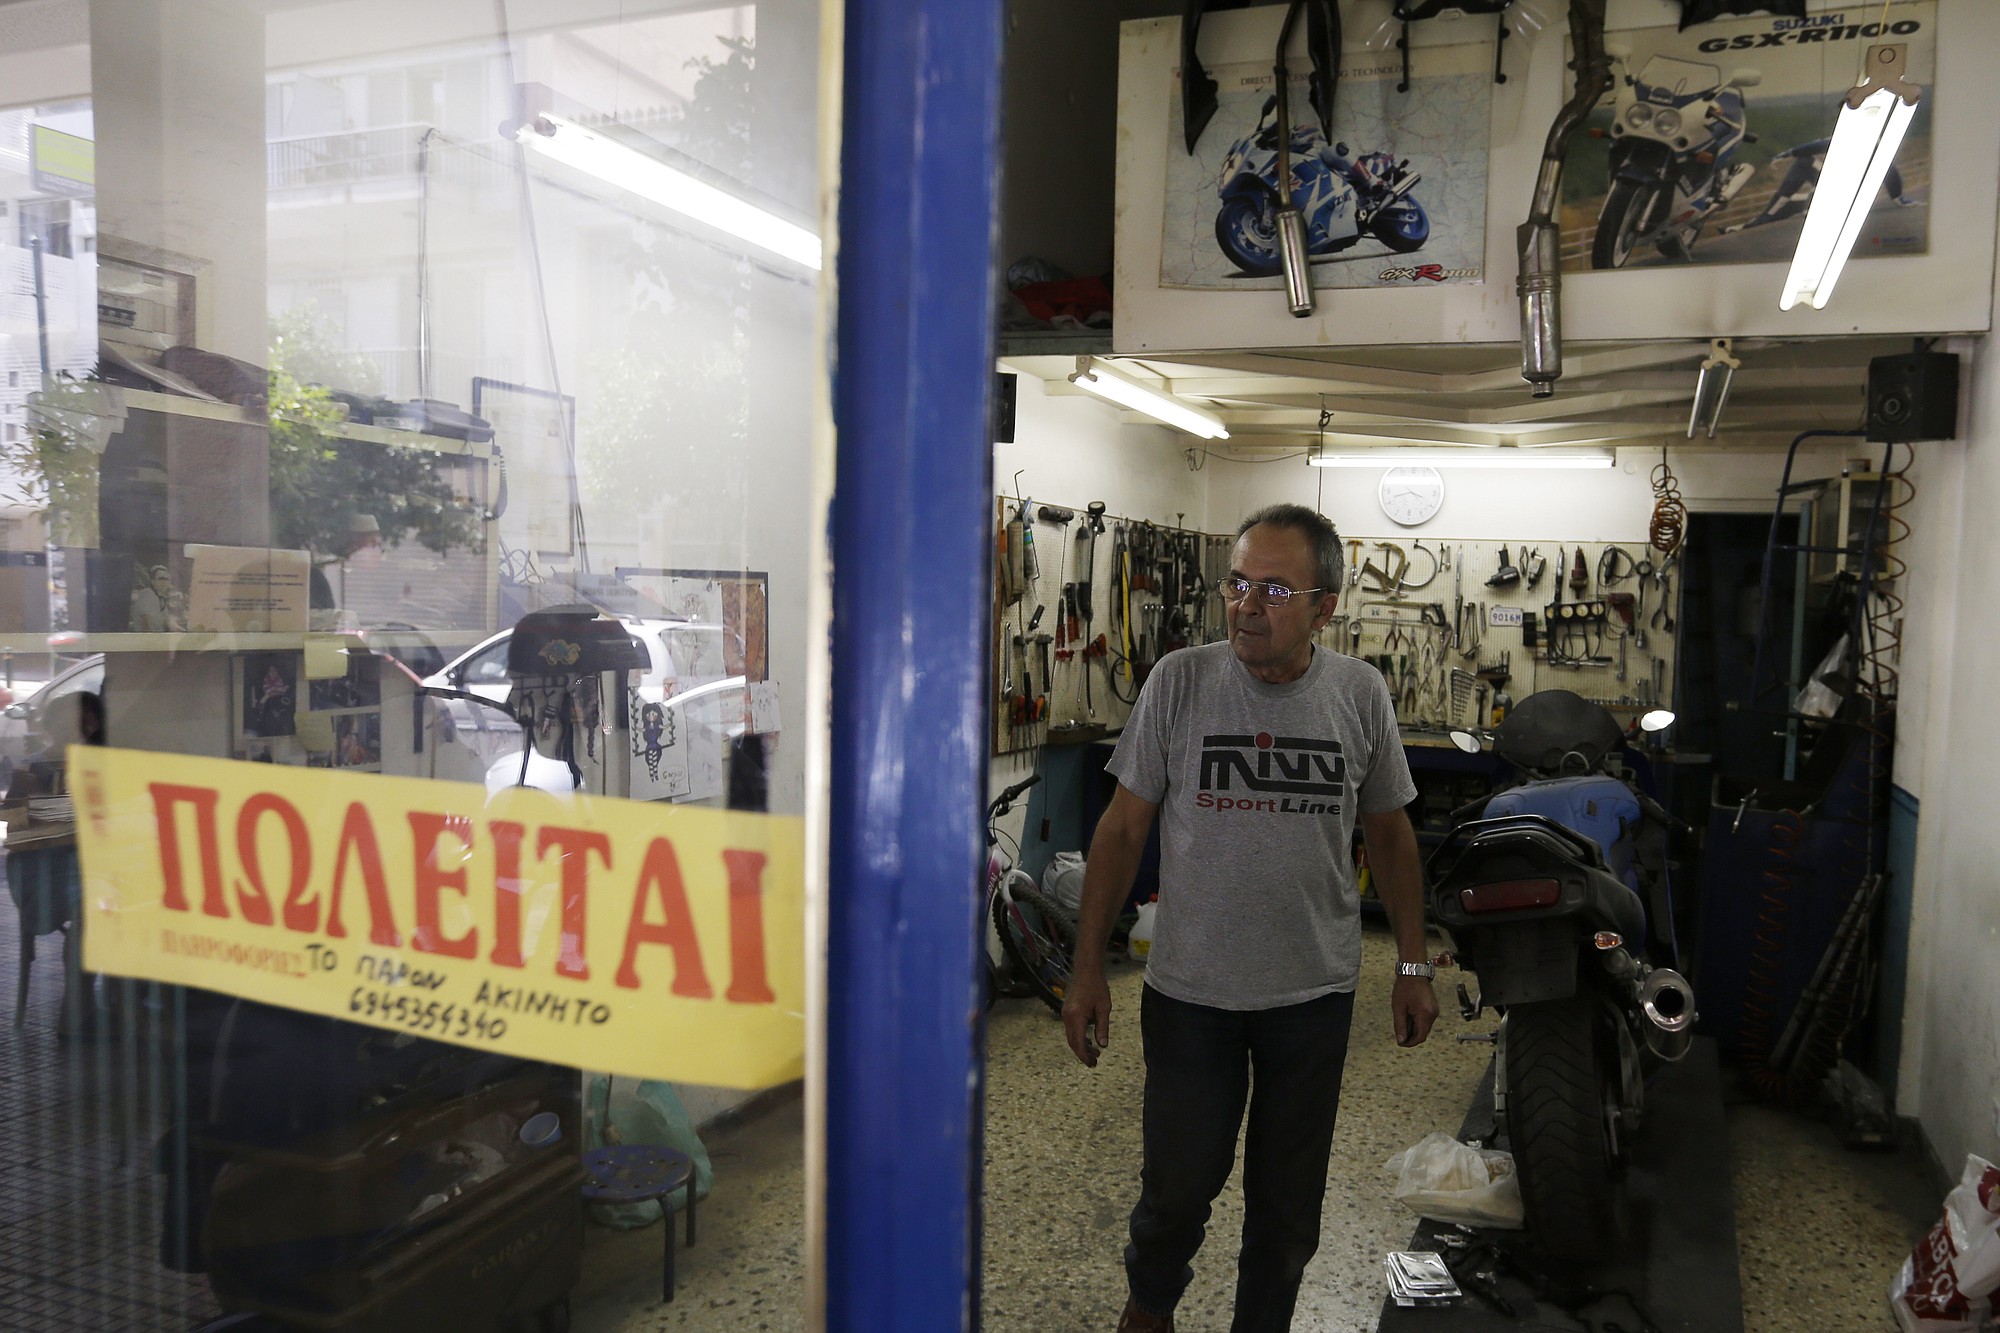 Mechanic Giorgos Prasinoudis steps out of his closed motorcycle repair shop, as a 'For Sale' sign is posted on the front window, in Athens, on Wednesday, July 22, 2015. Uncertainty over Greece's bailout and recent capital controls have led to a new spate of store closures in Greek capital.